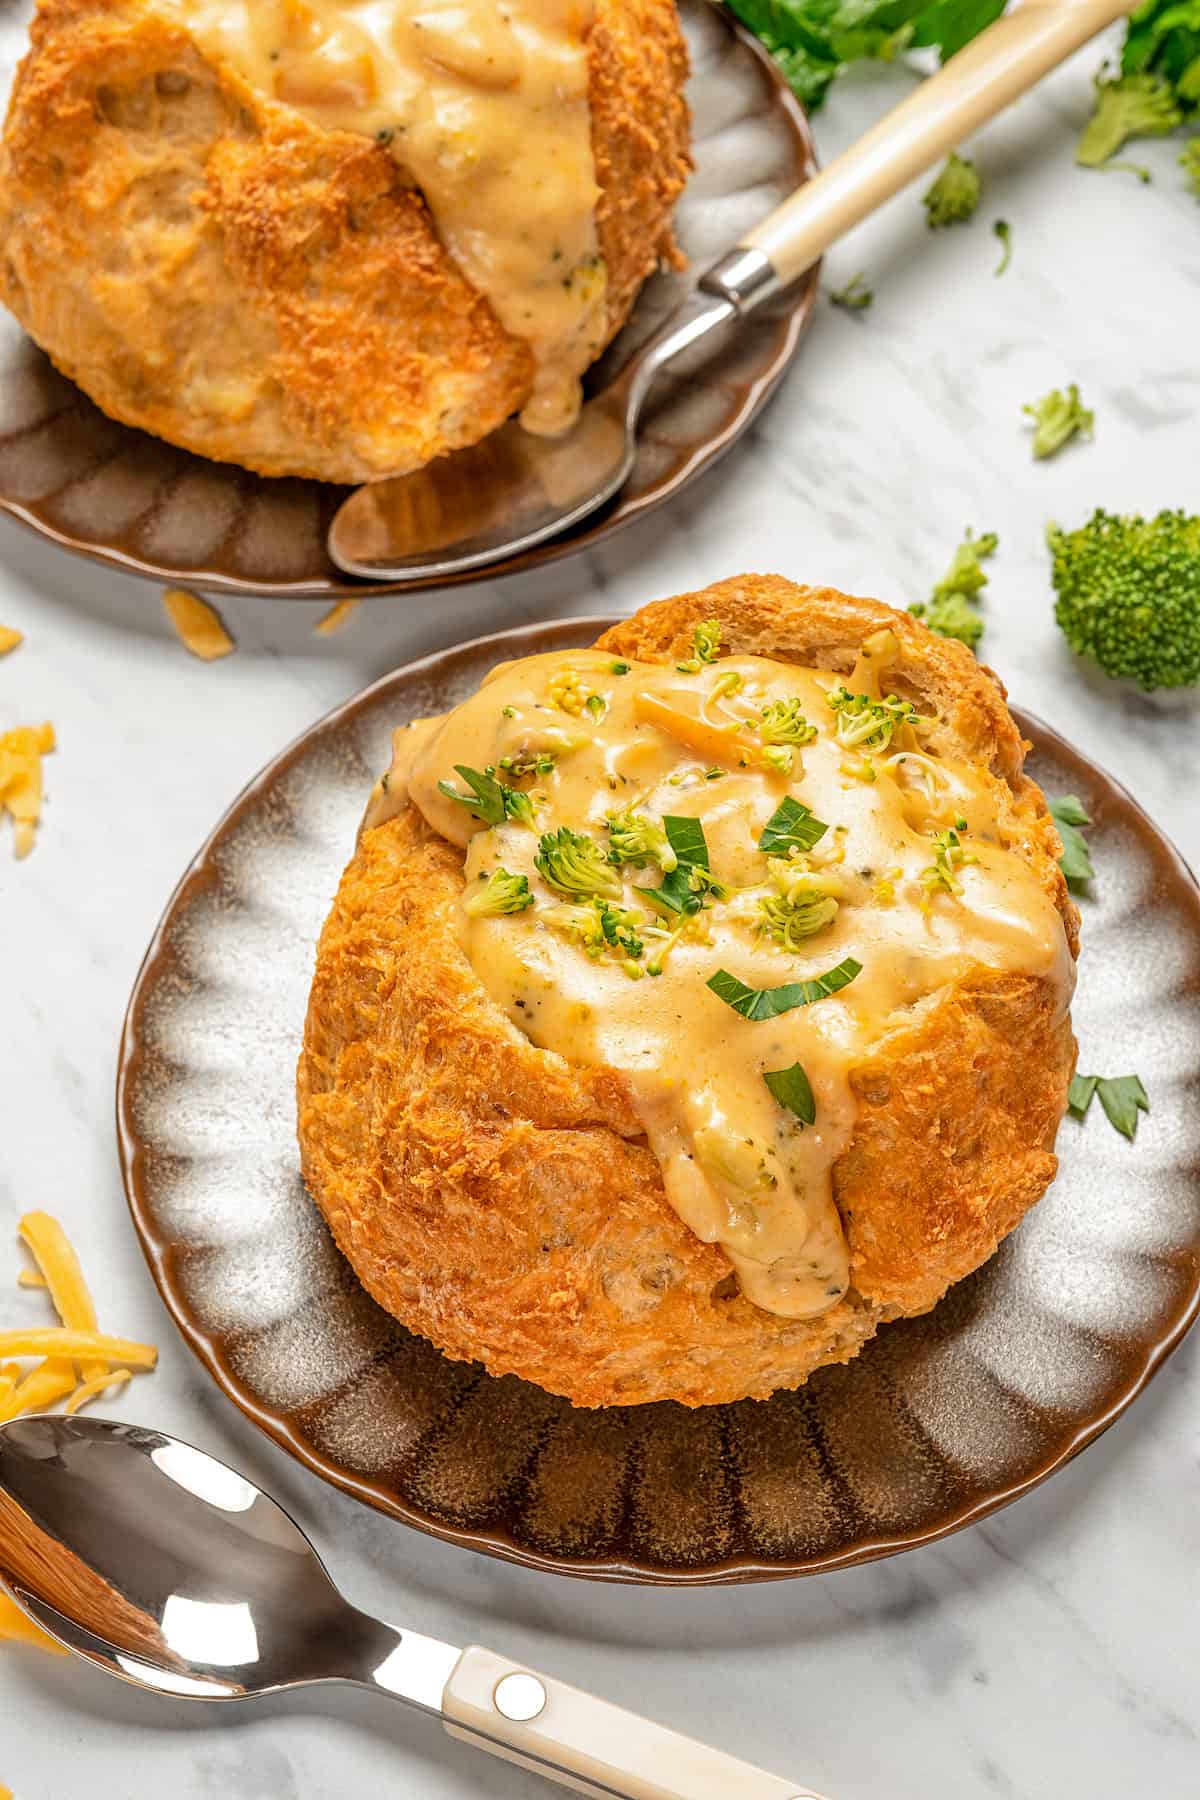 Instant Pot broccoli cheese soup served in a bread bowl.